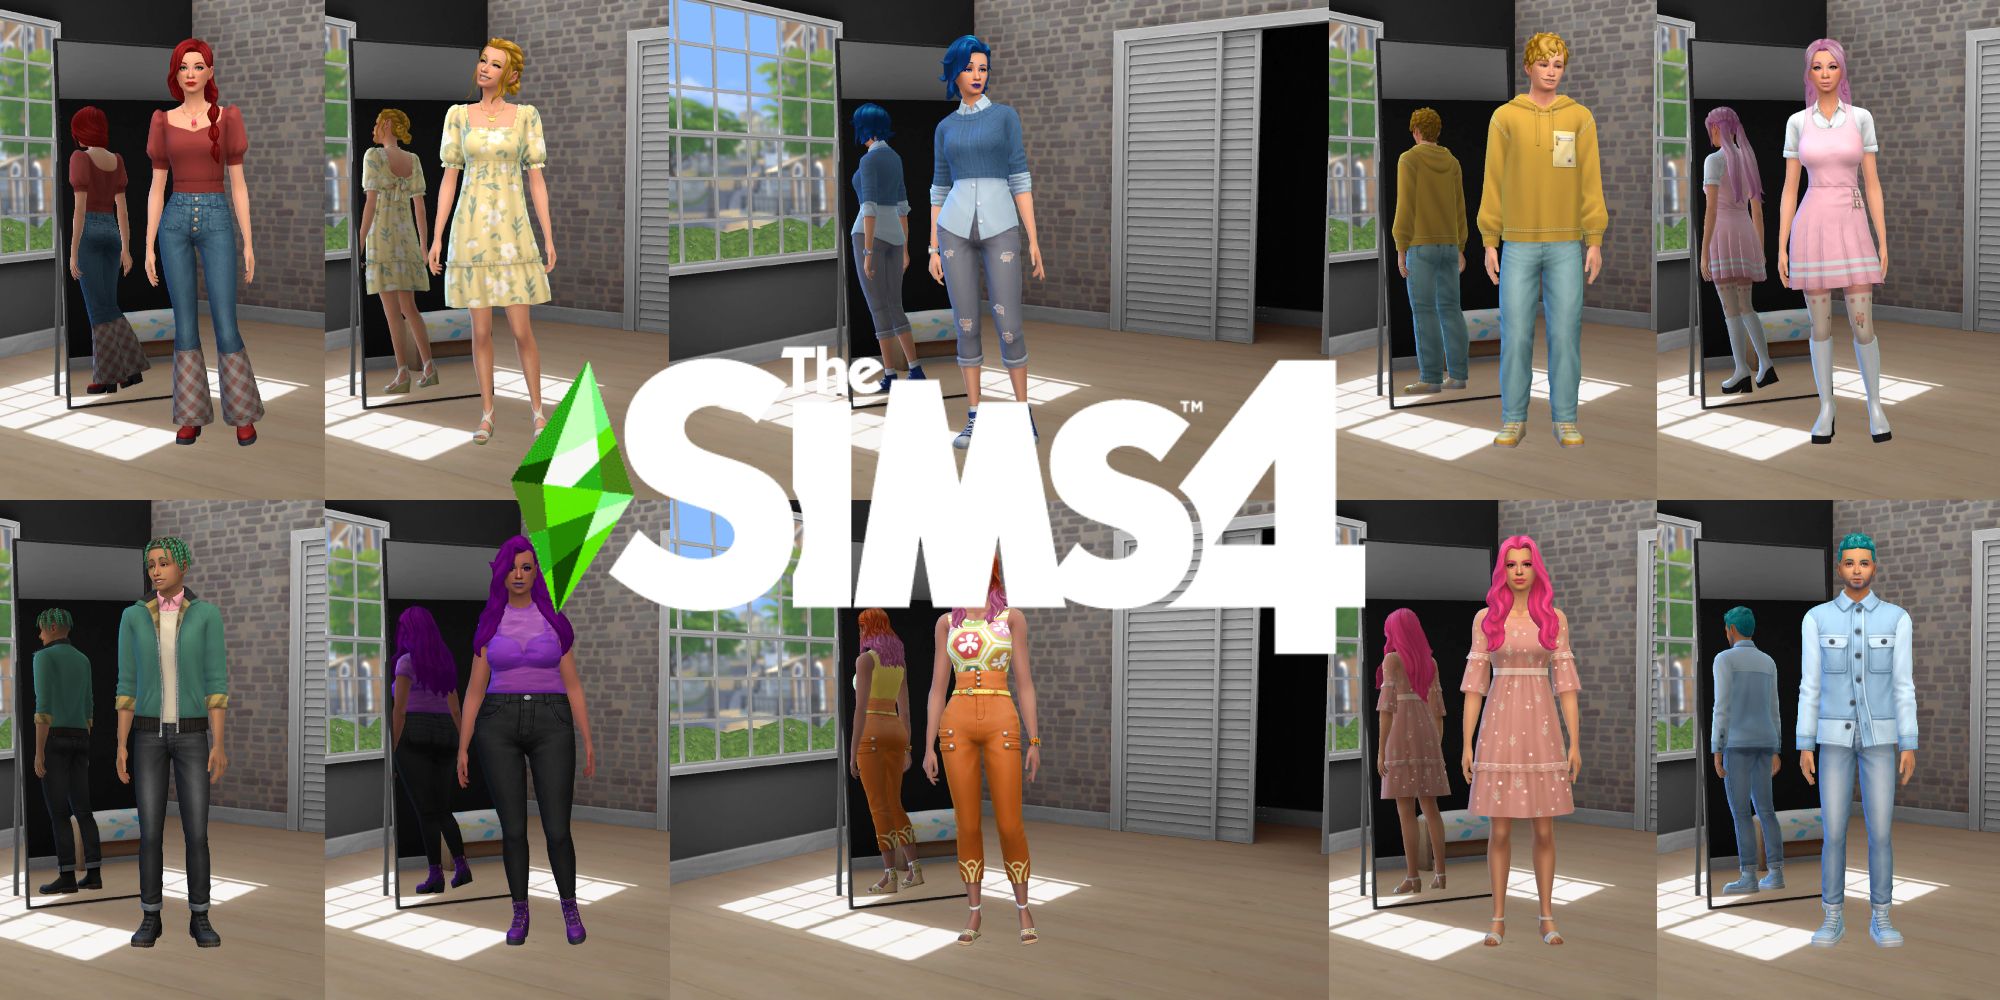 10 Sims with garden themed styles